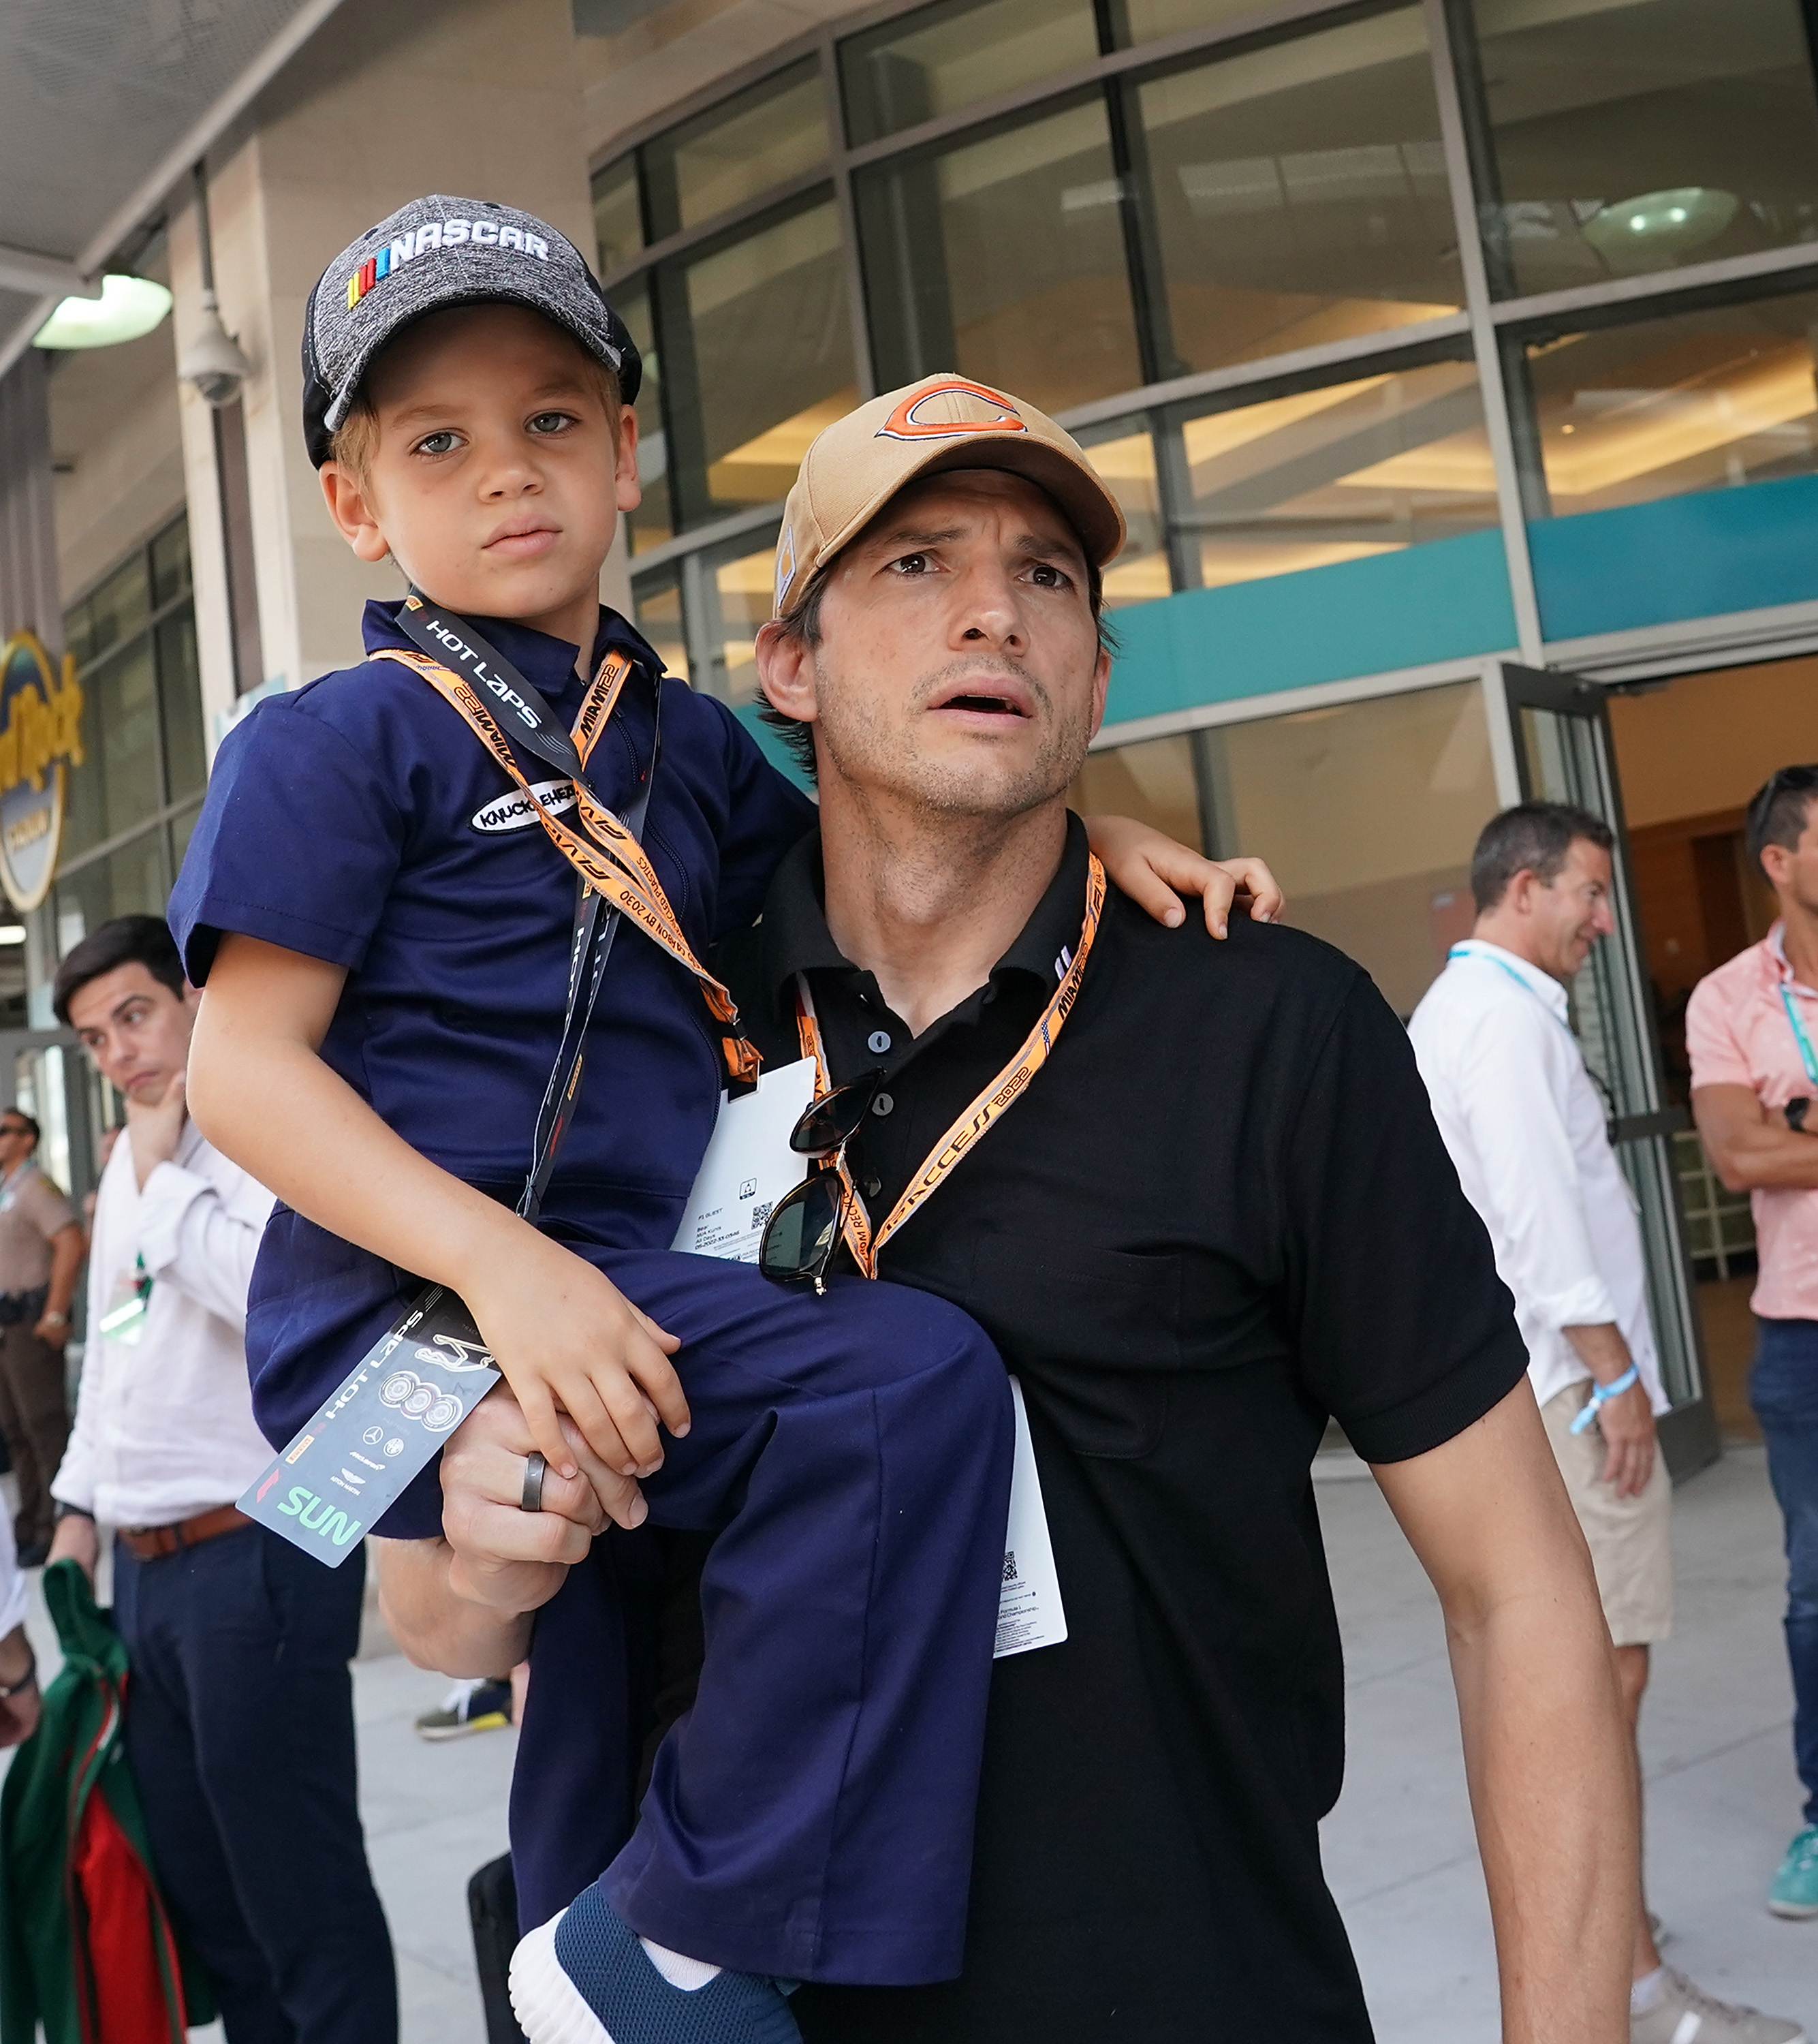 Dimitri and Ashton Kutcher at the Motorsport: Formula 1 World Championship, Miami Grand Prix race on May 8, 2022, in Miami, Florida | Source: Getty Images